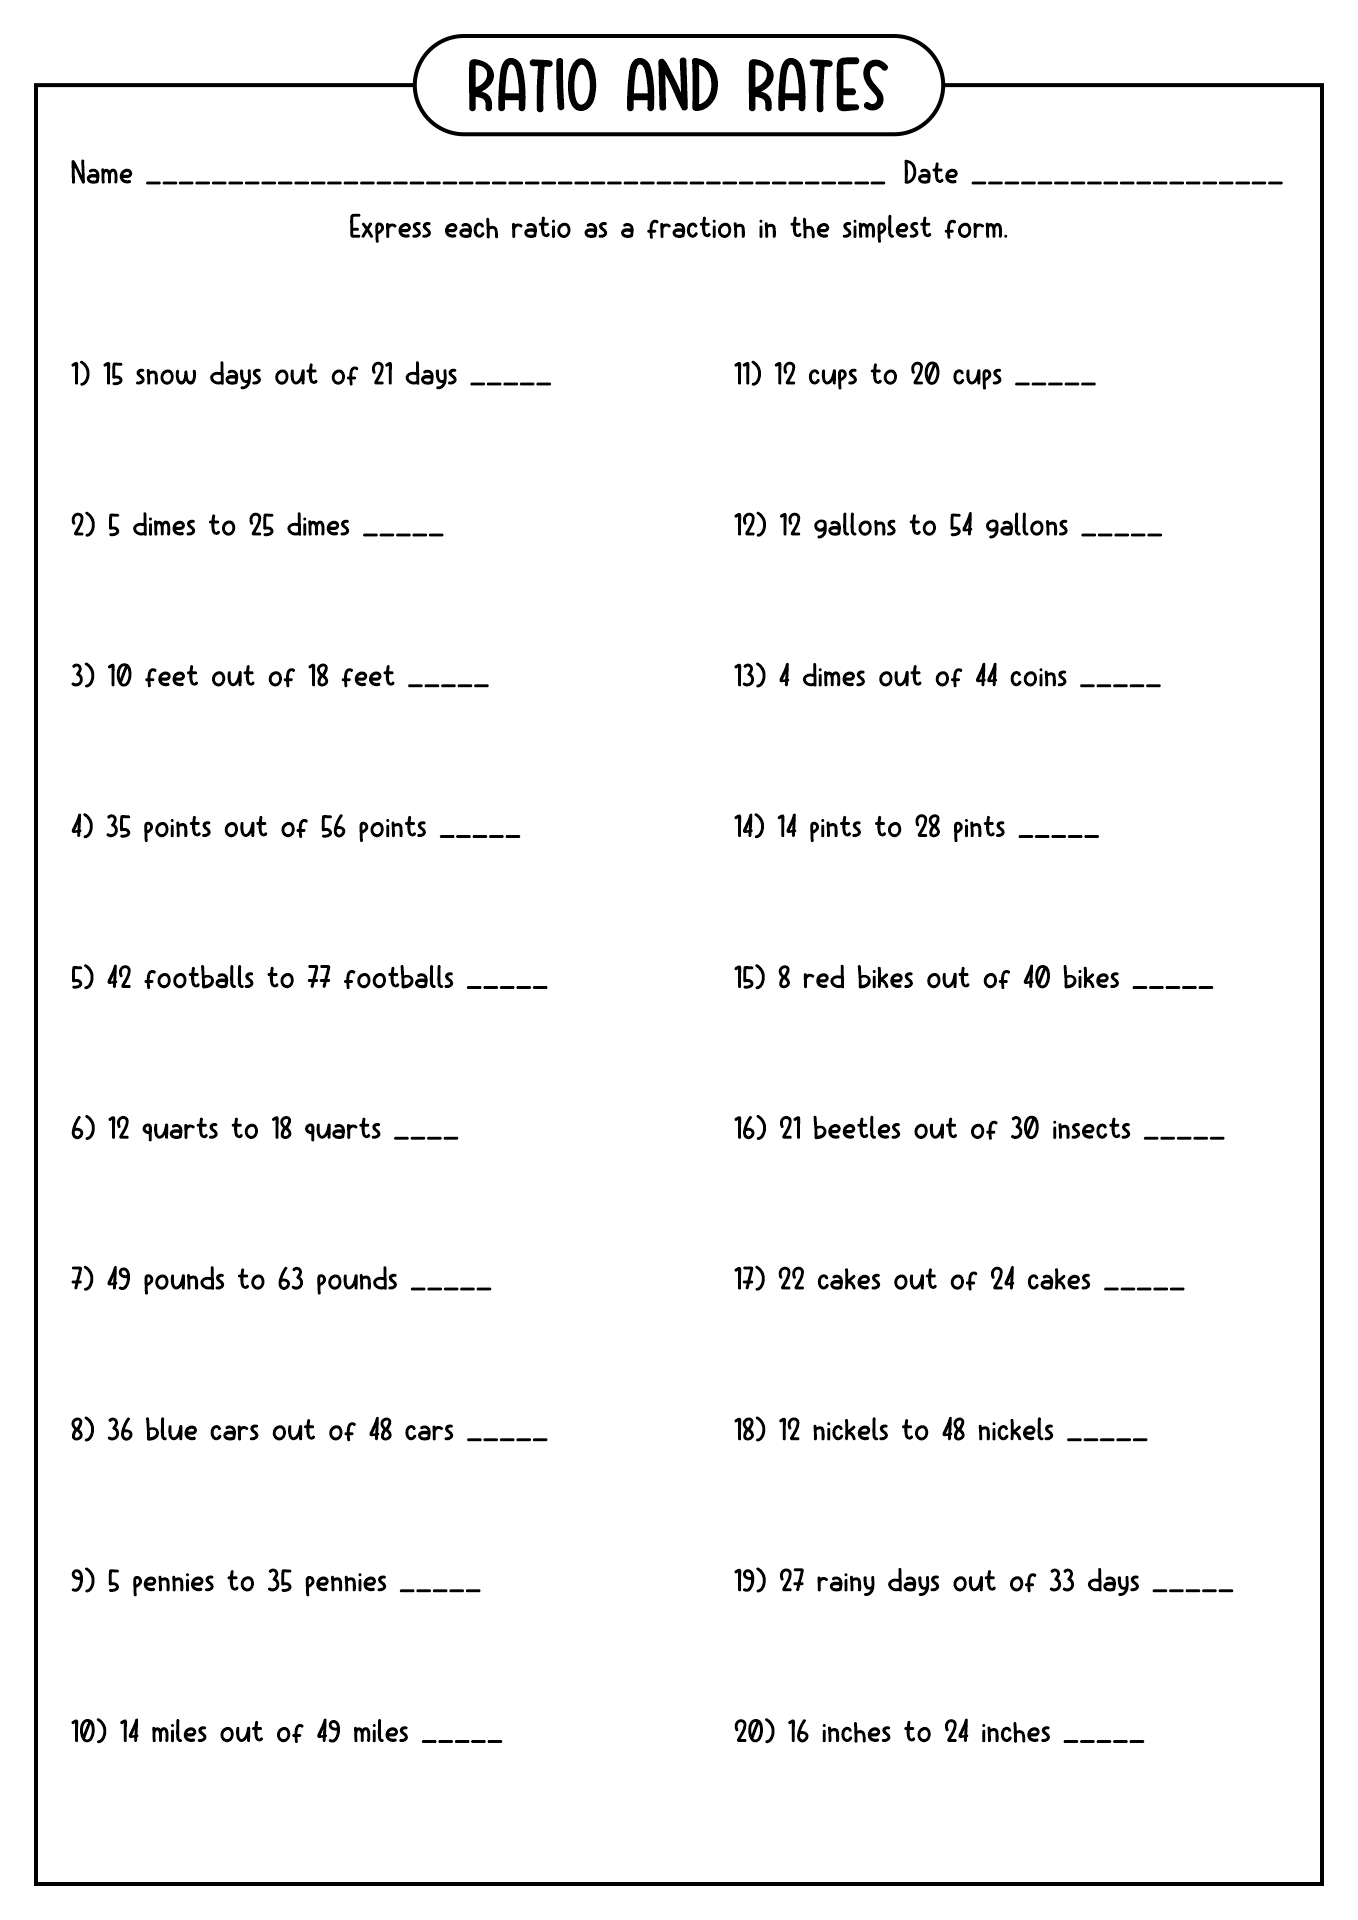 ratio-and-proportion-worksheet